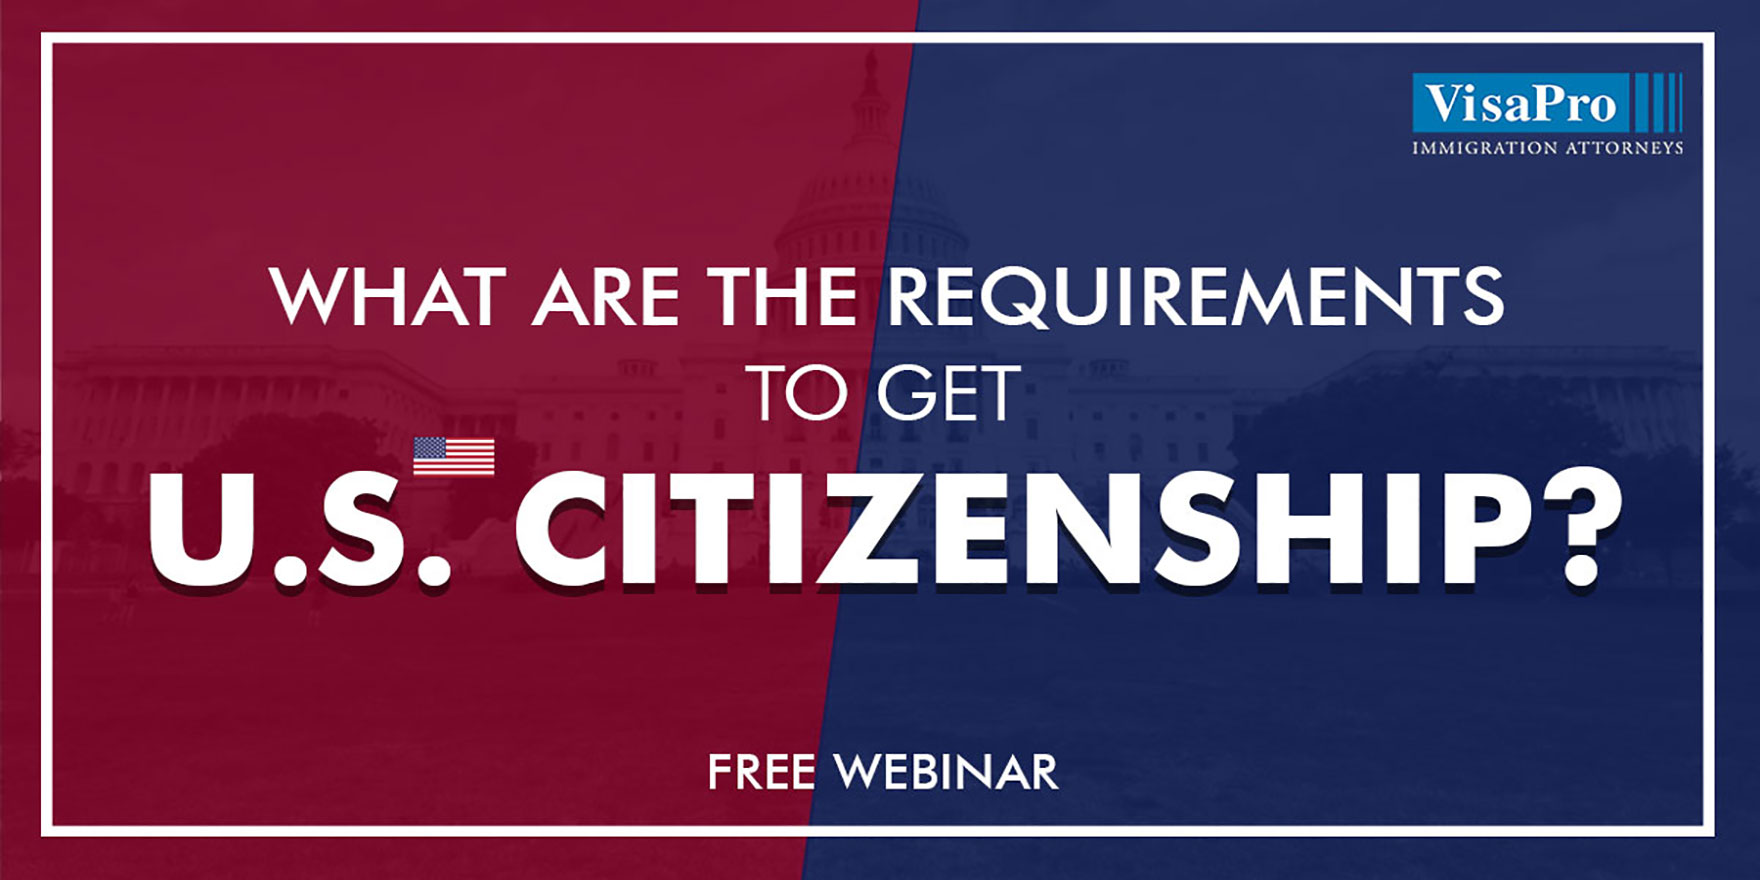 What Are The Requirements To Get A U.S. Citizenship?, Philadelphia, Pennsylvania, United States